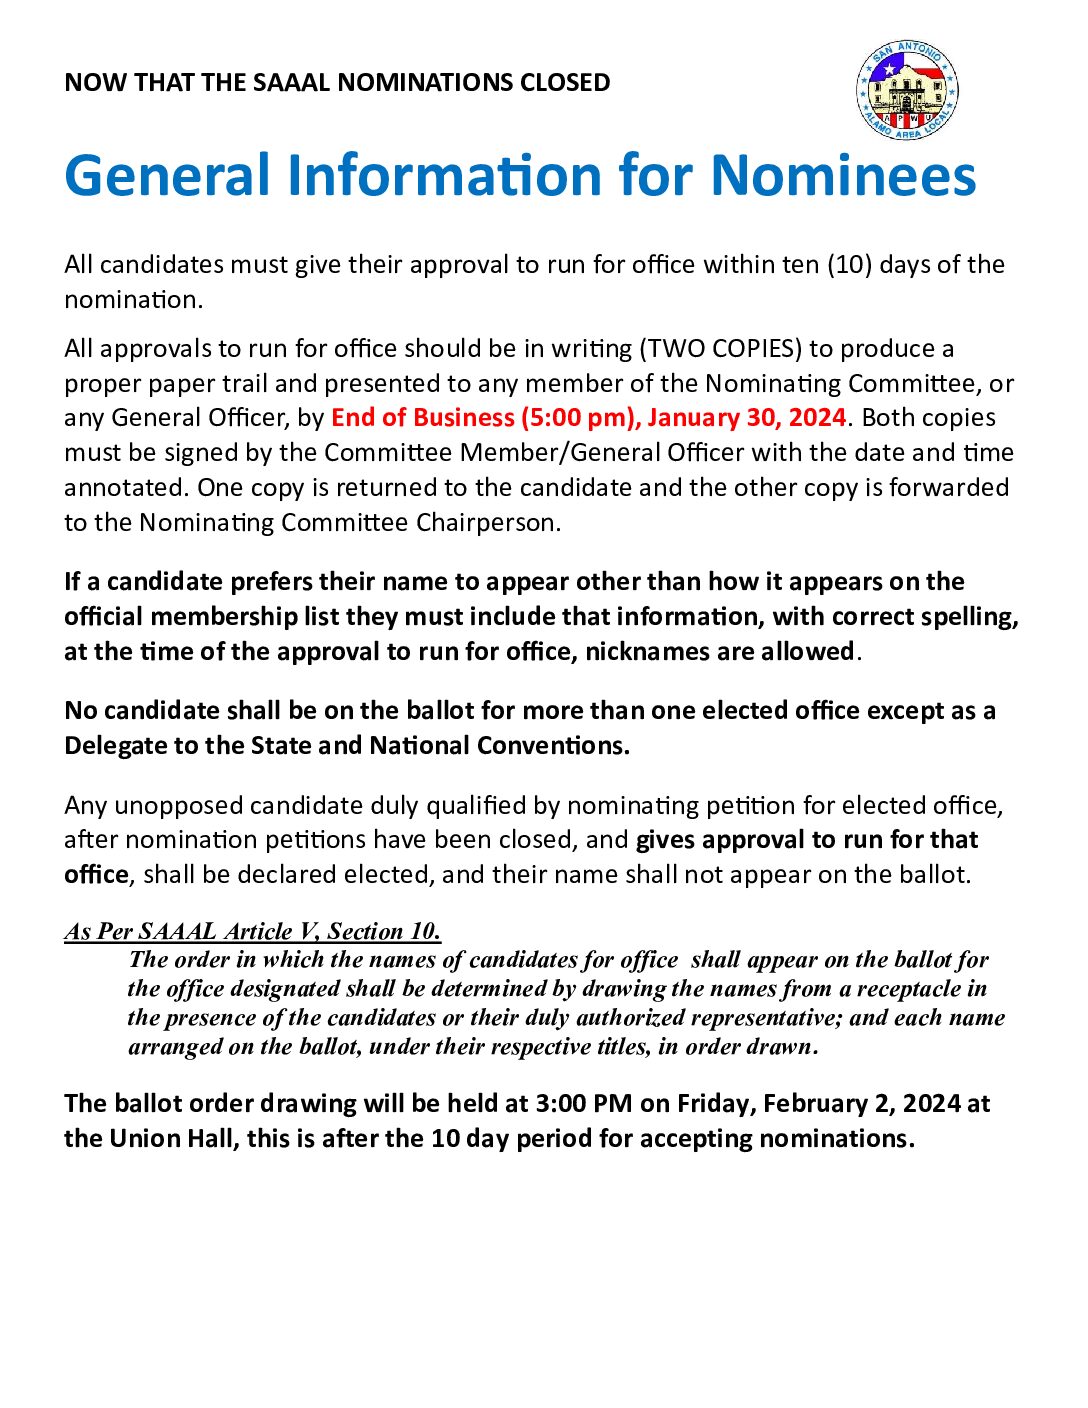 Elections Nominee Guidelines - 